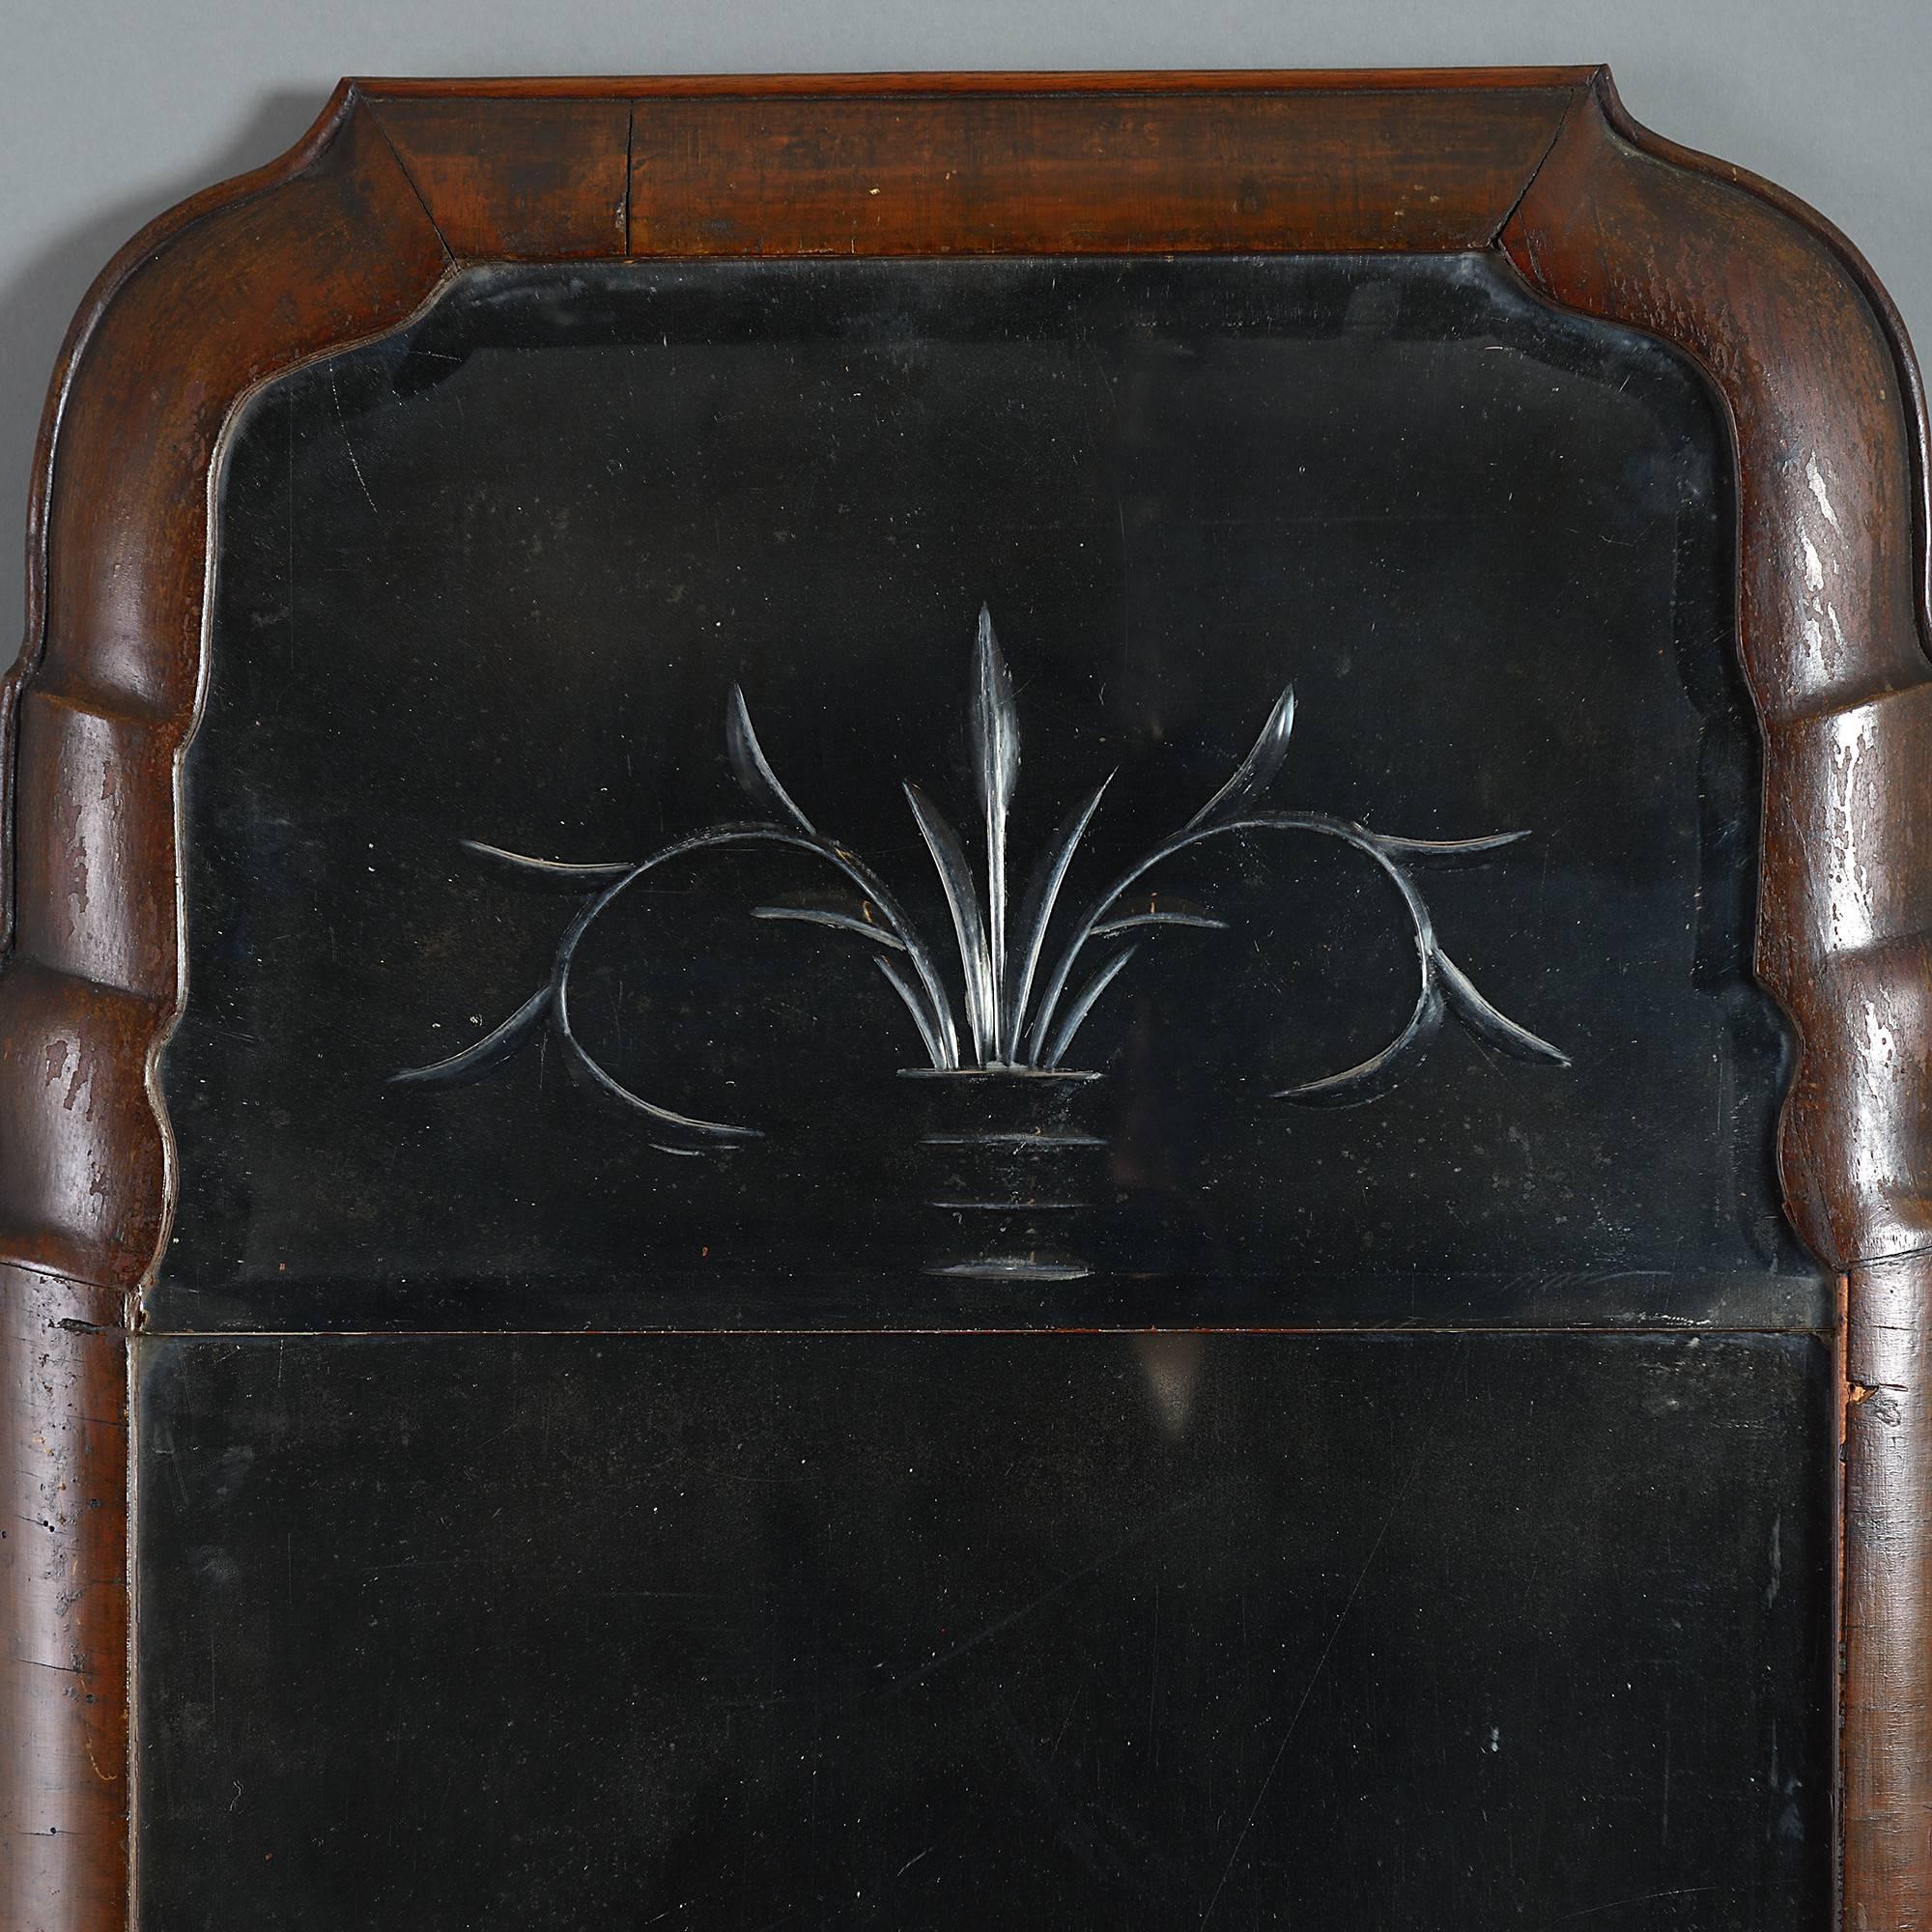 An early 18th century Queen Anne period walnut period mirror, having a shaped cushion moulded frame housing three bevel cut plates. 

The lower plate has most probably been taken from another mirror of the same period.